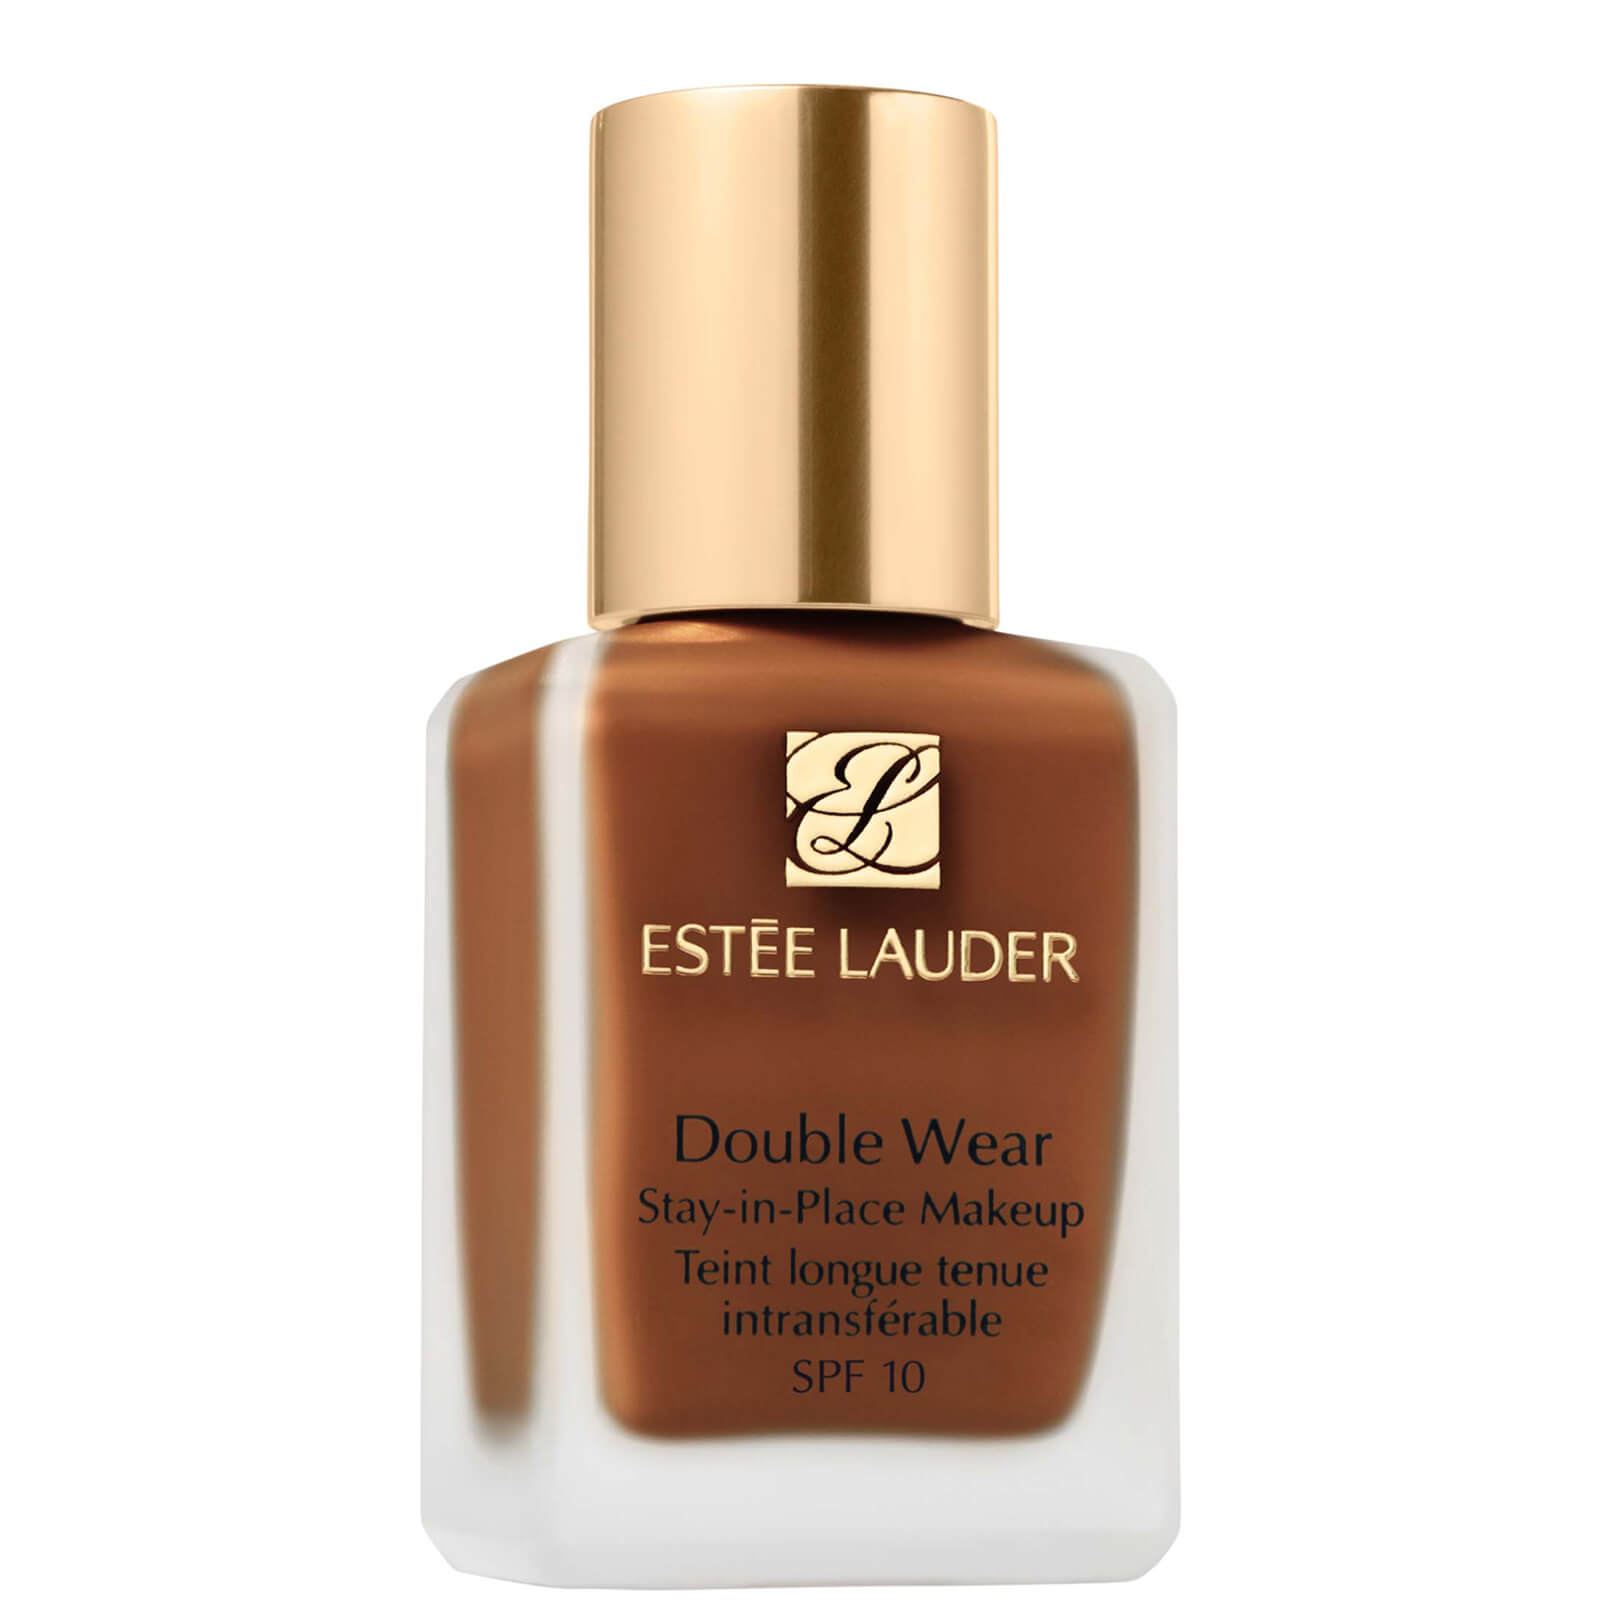 Estee Lauder Double Wear Stay-in-Place Makeup 30ml (Various Shades) - 6W1 Sandalwood